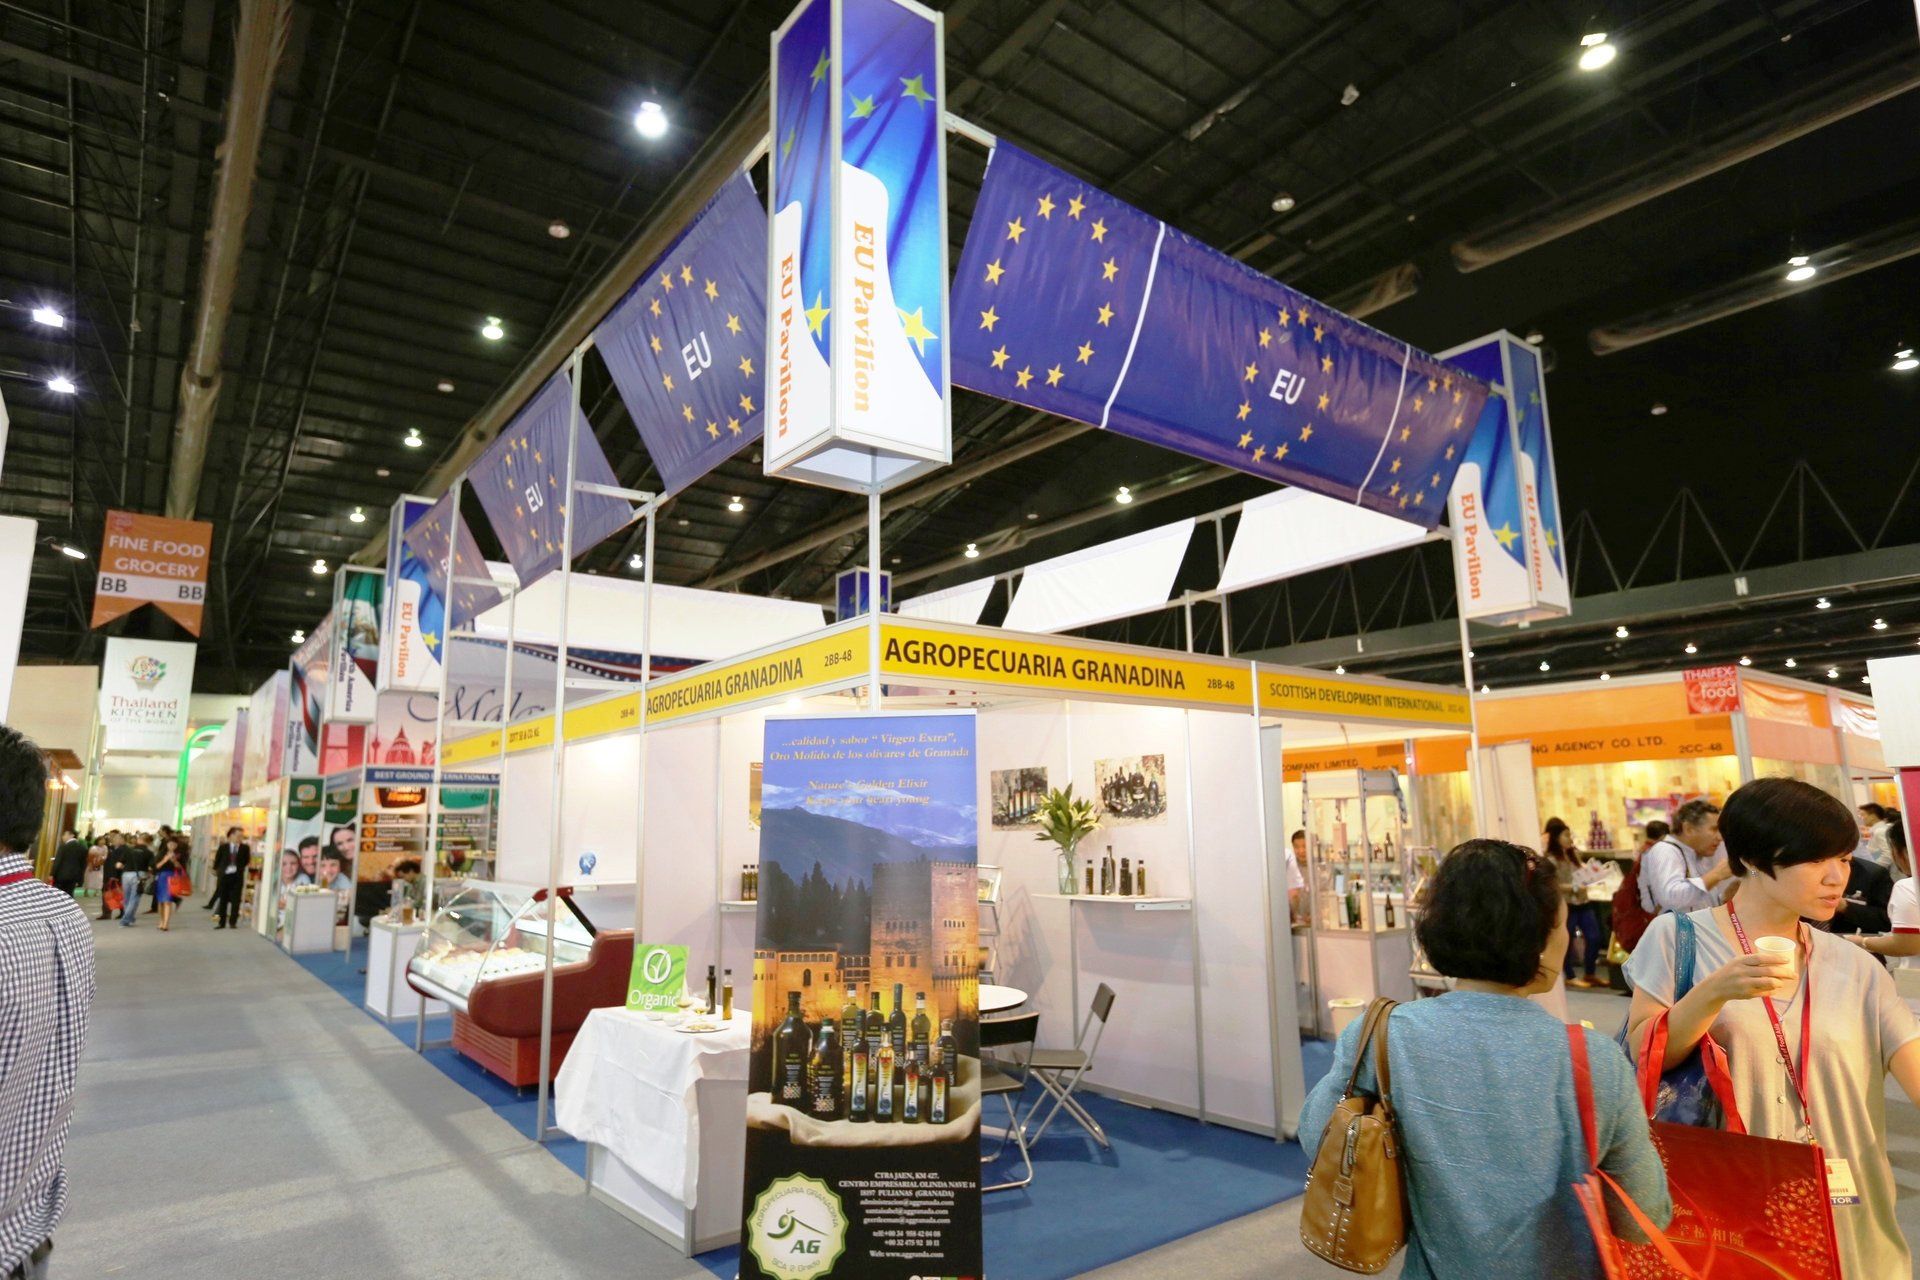 European Union Pavilion @ Thaifex 2014. Booth designed and built by Essential Global Fairs.